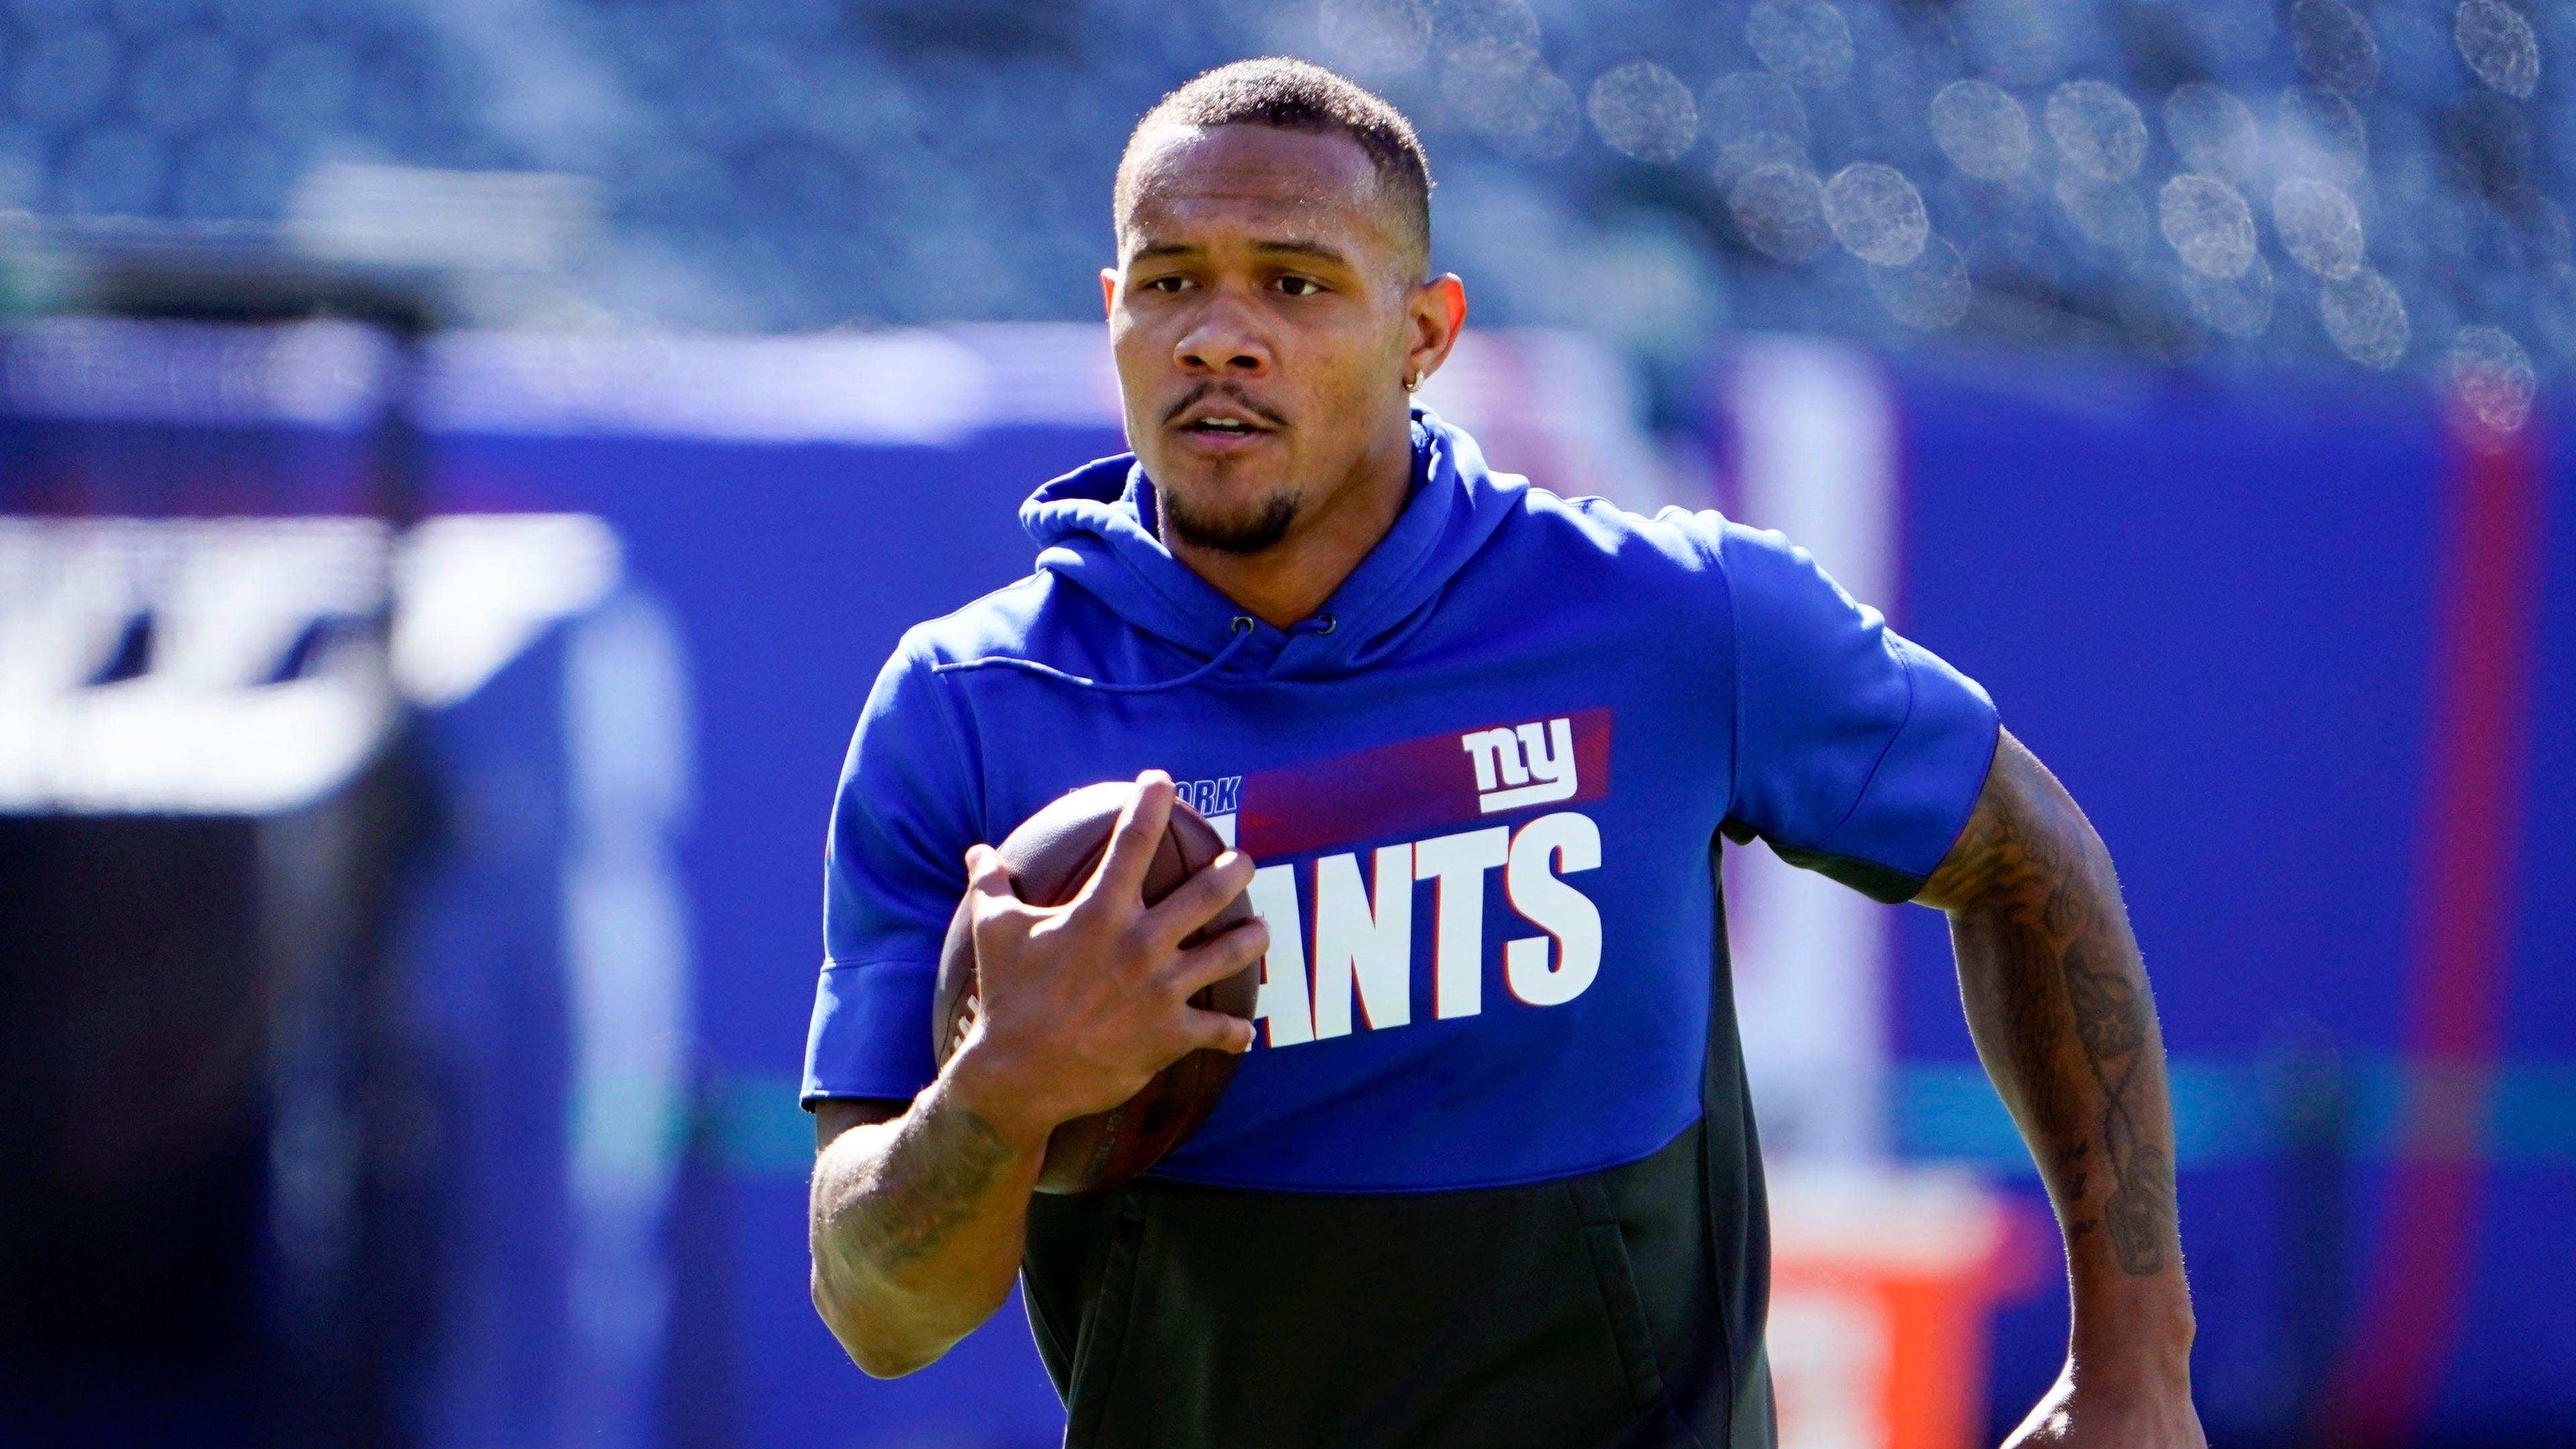 New York Giants wide receiver Kenny Golladay warms up on the field before the game at MetLife Stadium on Sunday, Sept. 26, 2021, in East Rutherford. Nyg Vs Atl / Danielle Parhizkaran/NorthJersey.com via Imagn Content Services, LLC